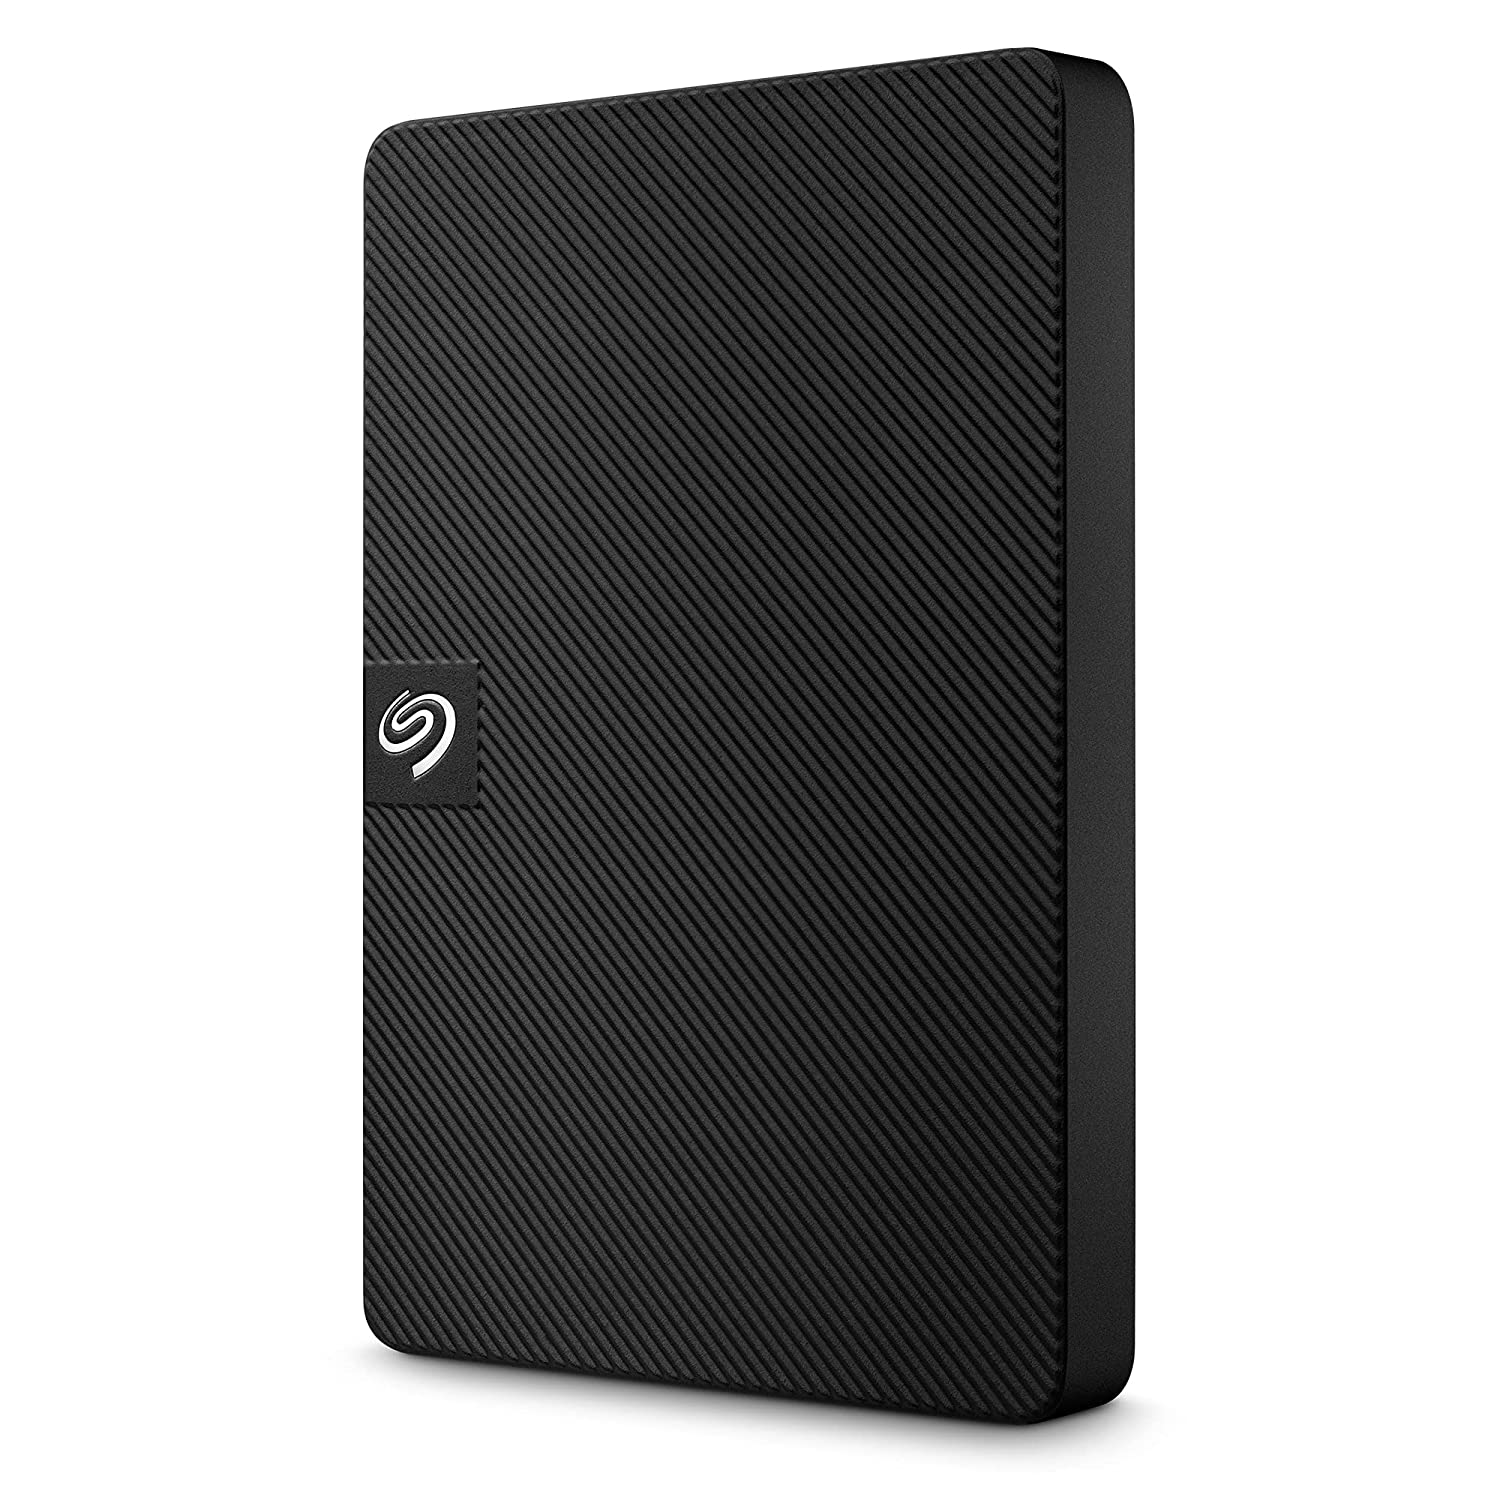 Hard disk extern seagate expansion 1.5tb usb 3.0